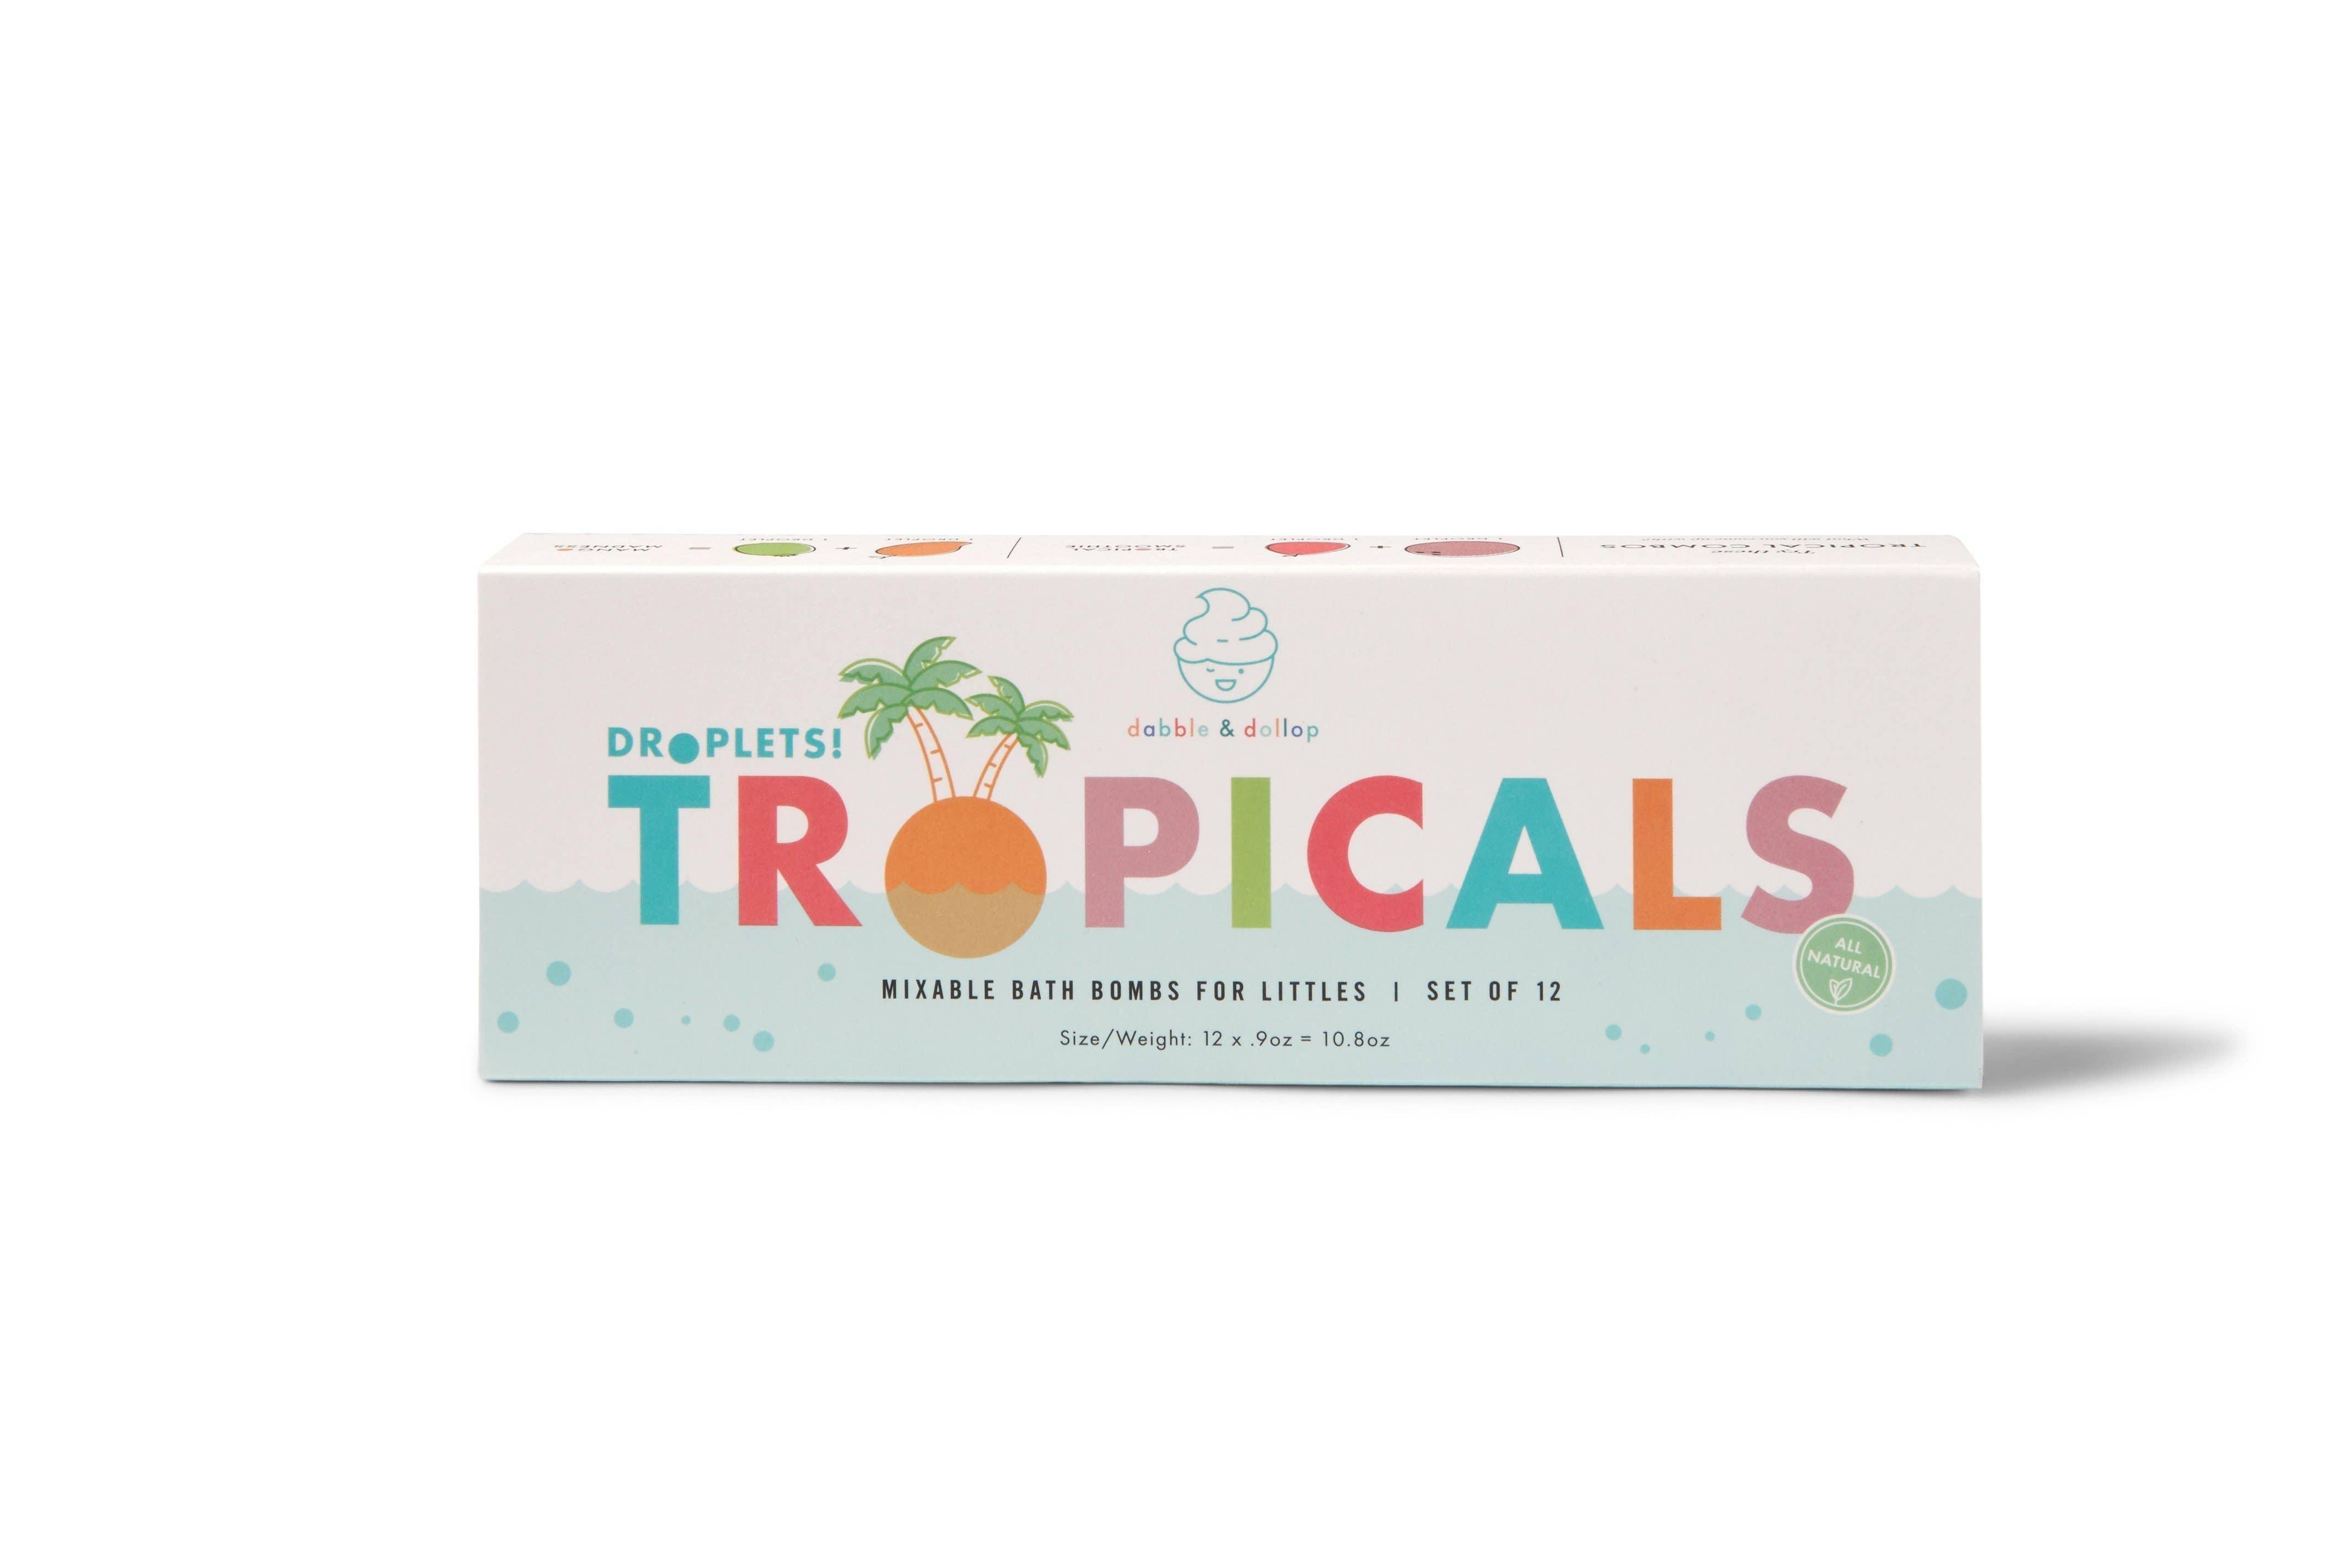 Bath Bombs - Tropicals by Dabble & Dollop - Why and Whale